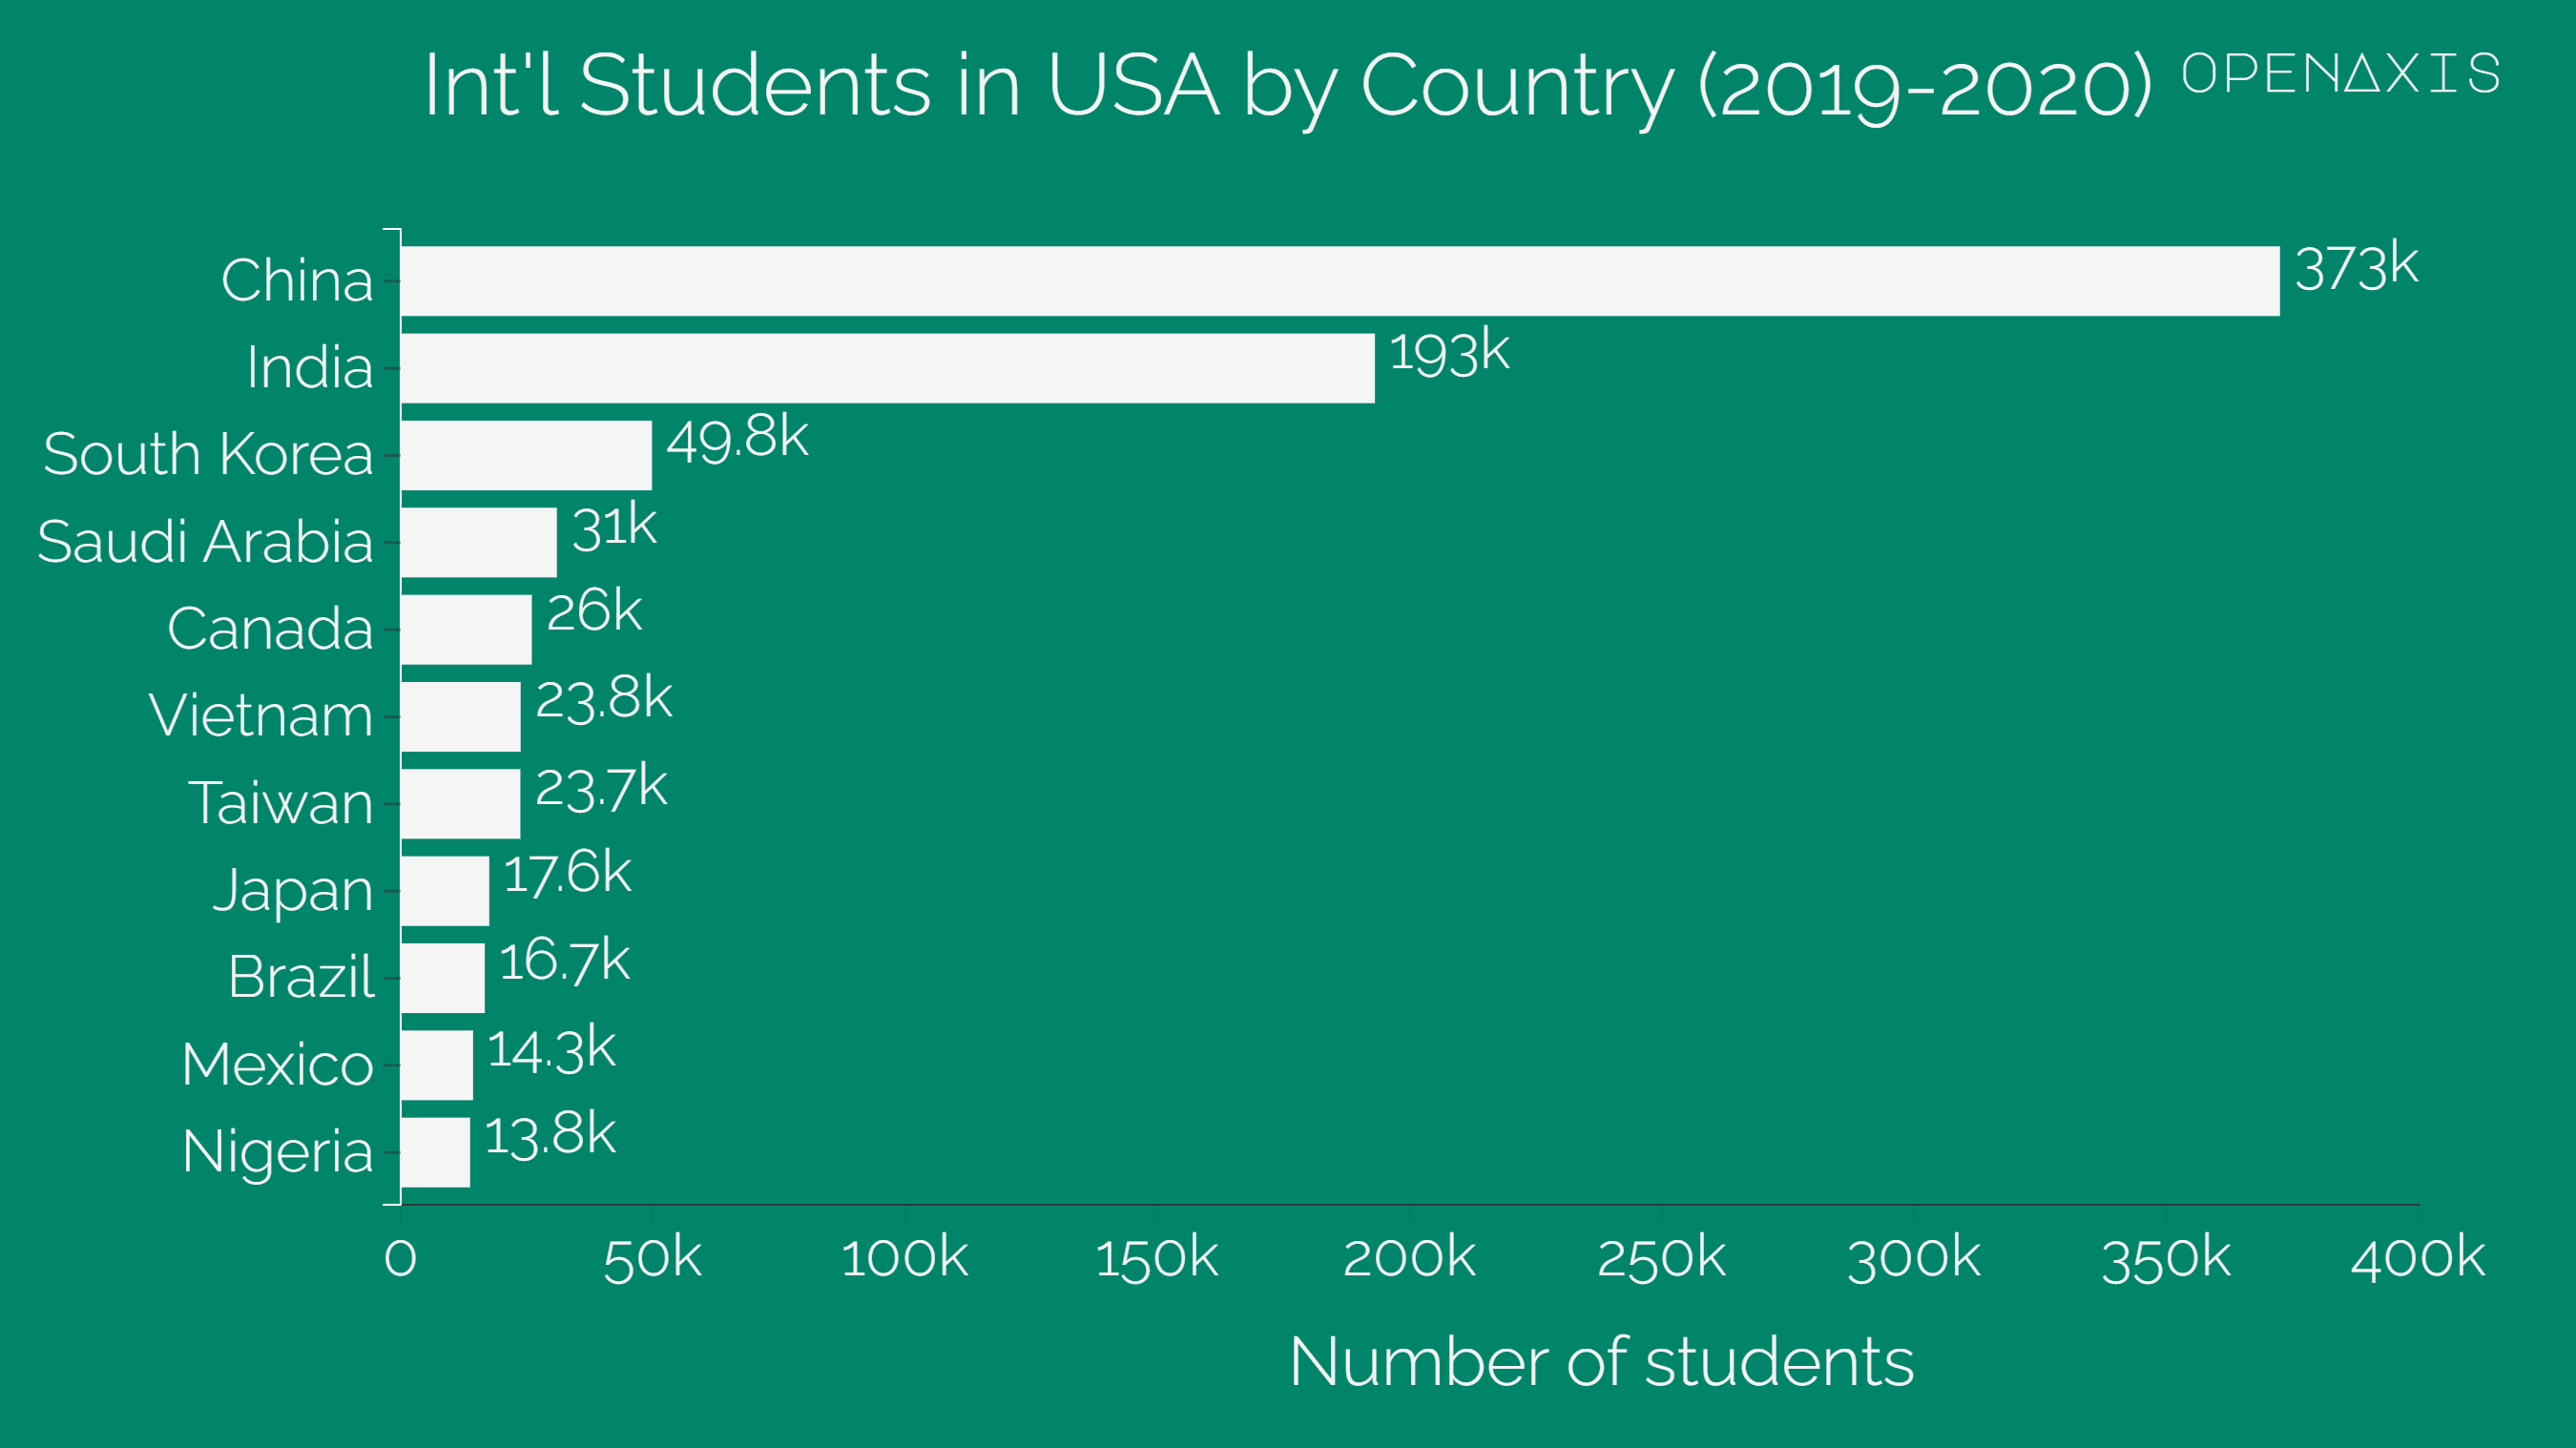 <p>Five of the Top 10 countries of origin for international students in the US during the 2019-2020 university academic year were from Asia. Check out the dataset, which goes as far back as 1948 to see how enrollment has changed over time and from where.</p><p><span data-index="0" data-denotation-char data-id="0" data-value="&lt;a href=&quot;/search?q=%23education&quot; target=_self&gt;#education" data-link="/search?q=%23education">﻿<span contenteditable="false"><span></span><a href="/search?q=%23education" target="_self">#education</a></span>﻿</span> <span data-index="0" data-denotation-char data-id="0" data-value="&lt;a href=&quot;/search?q=%23trivia&quot; target=_self&gt;#trivia" data-link="/search?q=%23trivia">﻿<span contenteditable="false"><span></span><a href="/search?q=%23trivia" target="_self">#trivia</a></span>﻿</span></p><p>Source: <a href="/data/3644" target="_blank">Institute of International Education, Open Doors Report on International Educational Exchange</a></p>